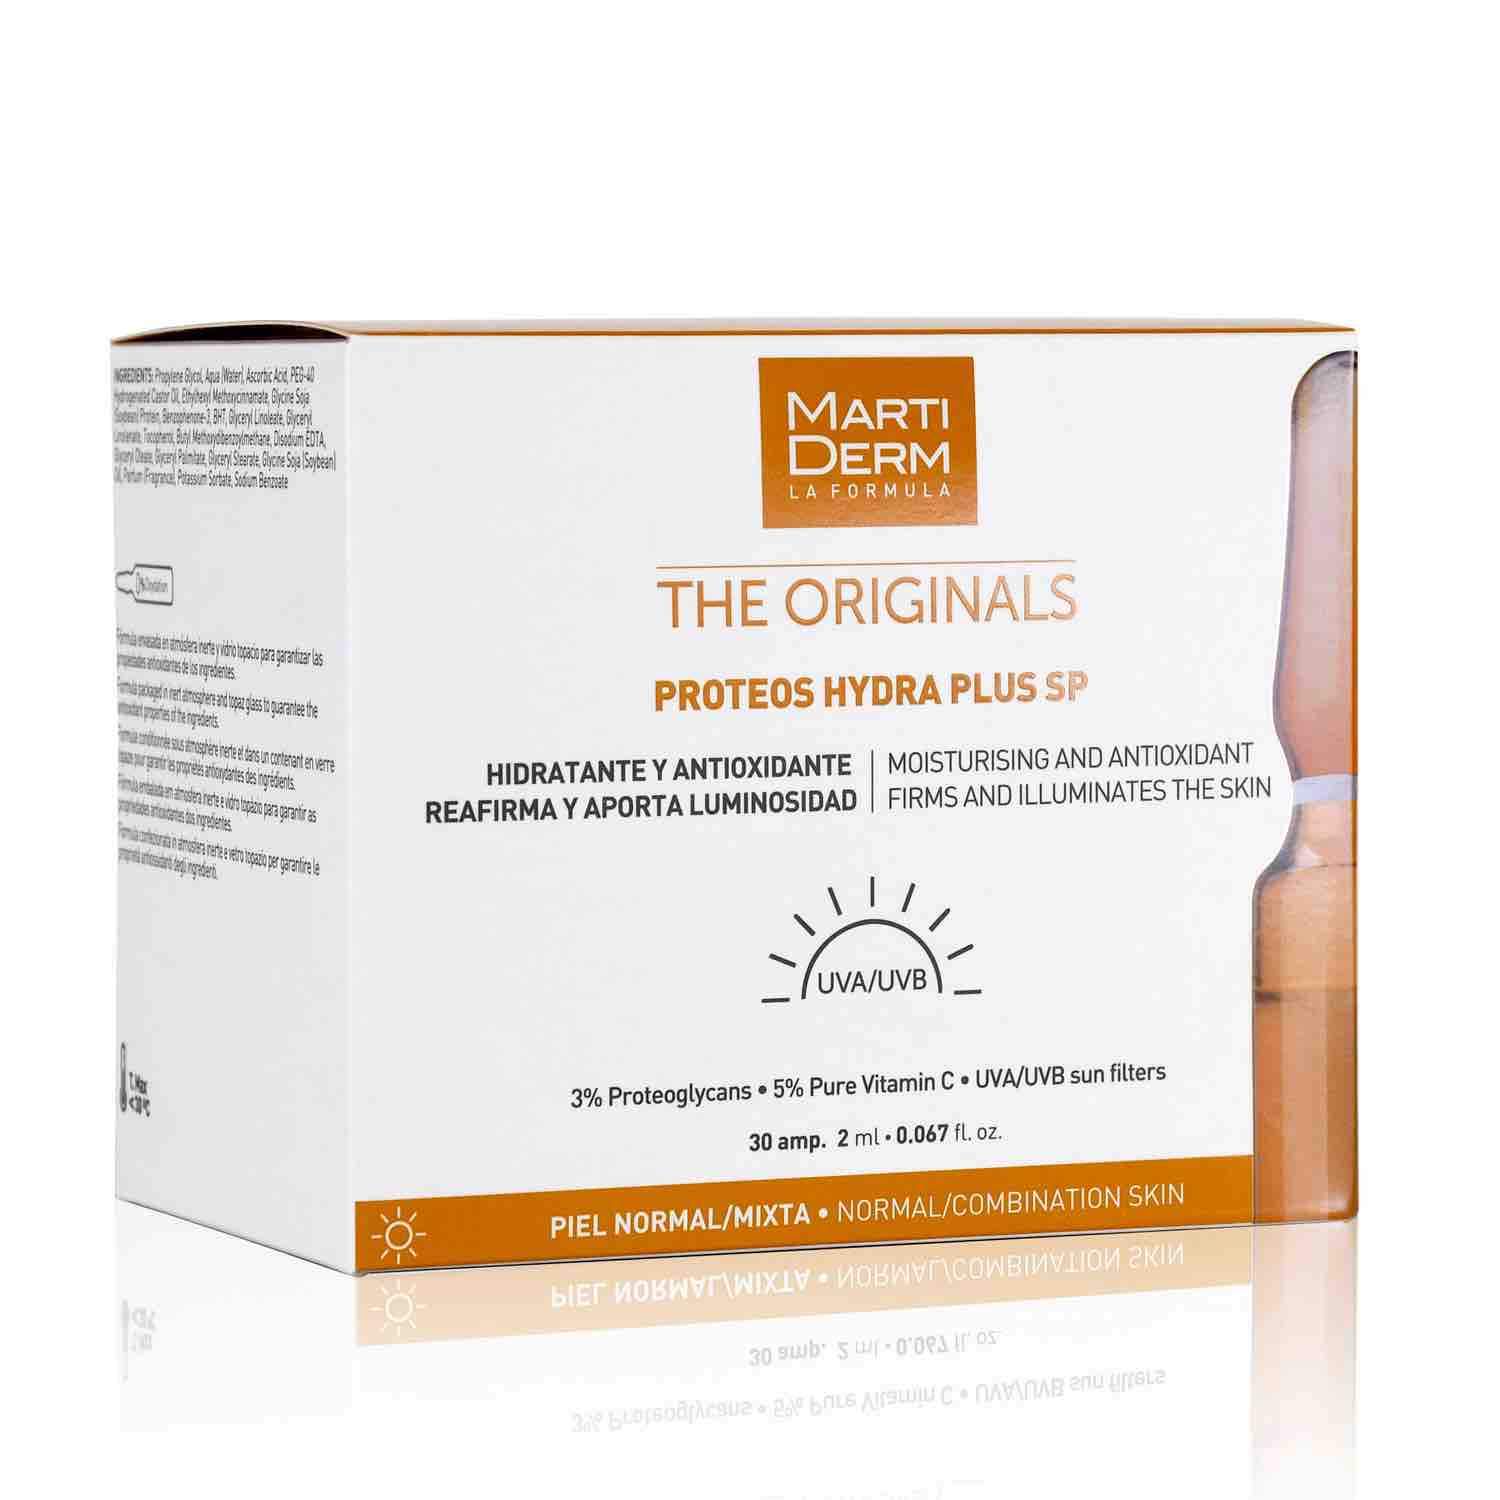 Shop Proteos Hydra Plus SP 30 Ampoules from Martiderm on SublimeLife.in. Best for moisturising and brightening skin.